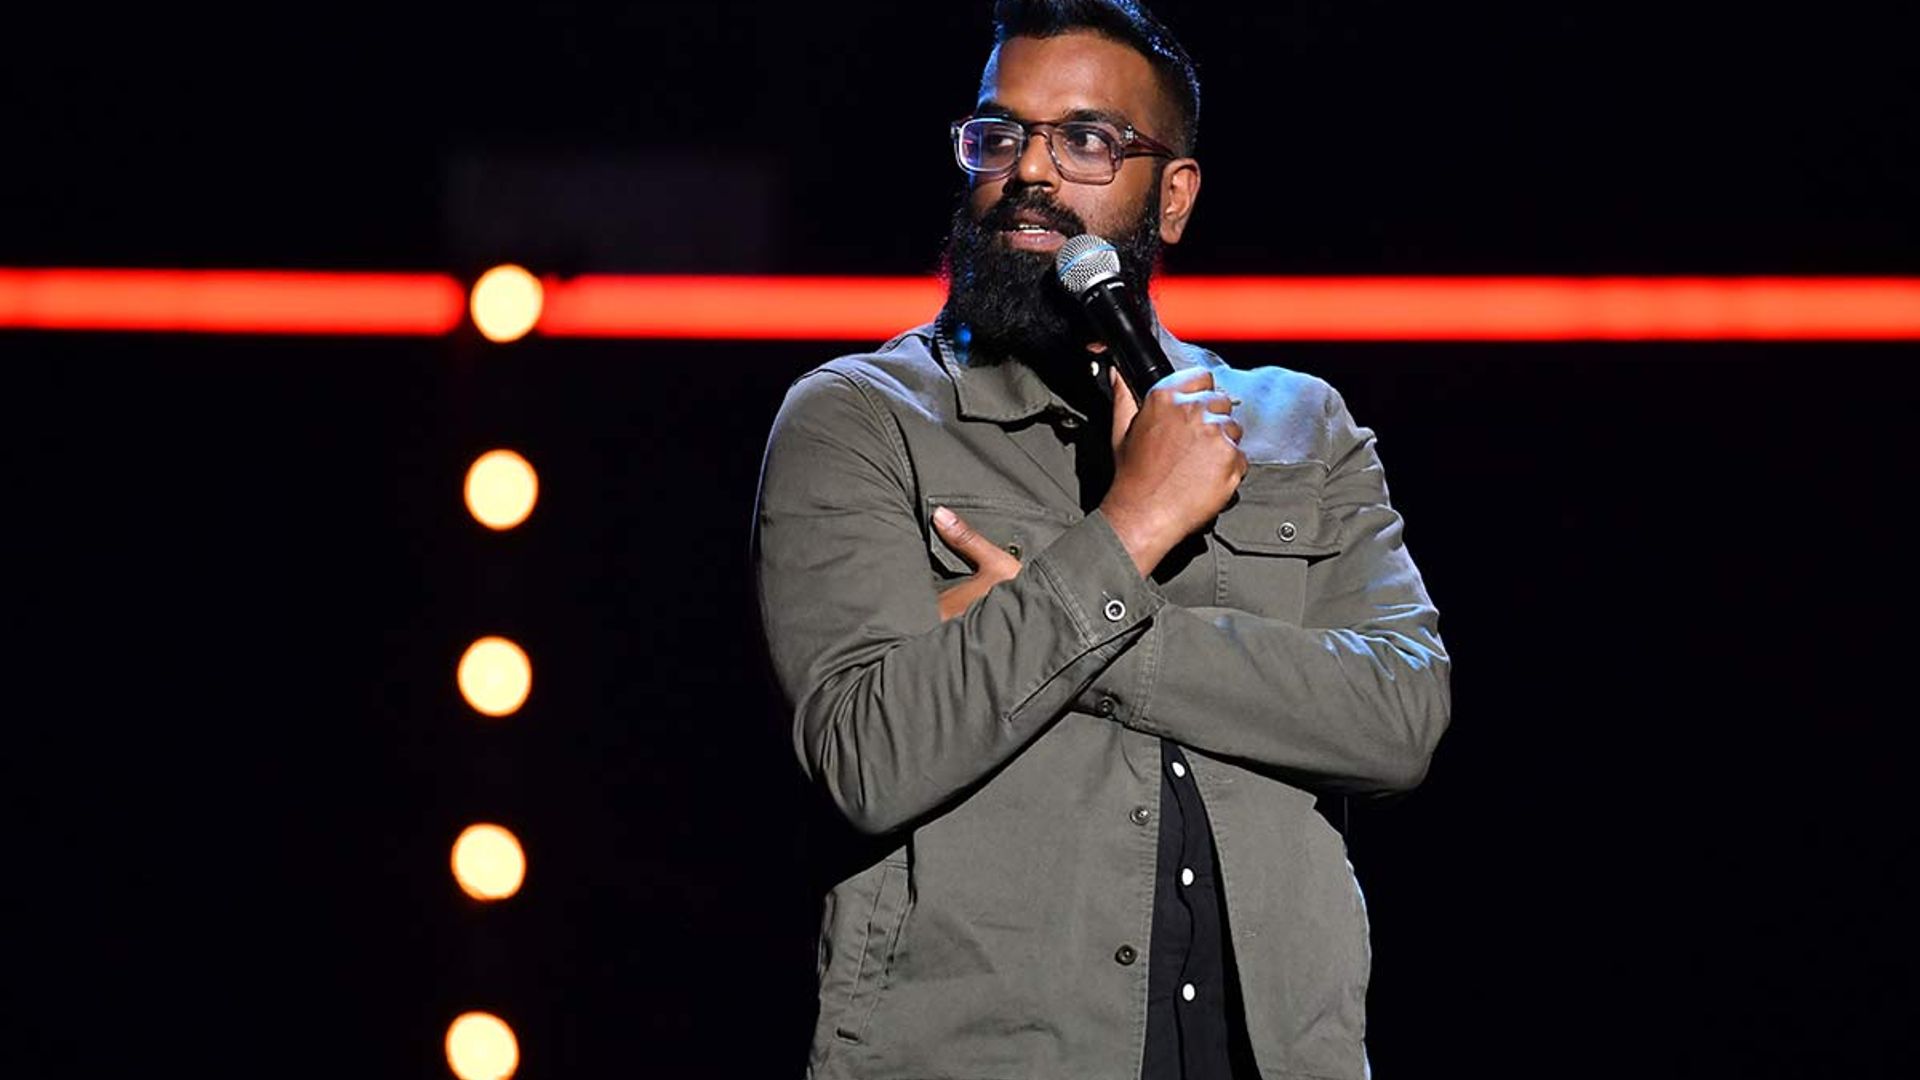 Everything you need to know about comedian and presenter Romesh Ranganathan